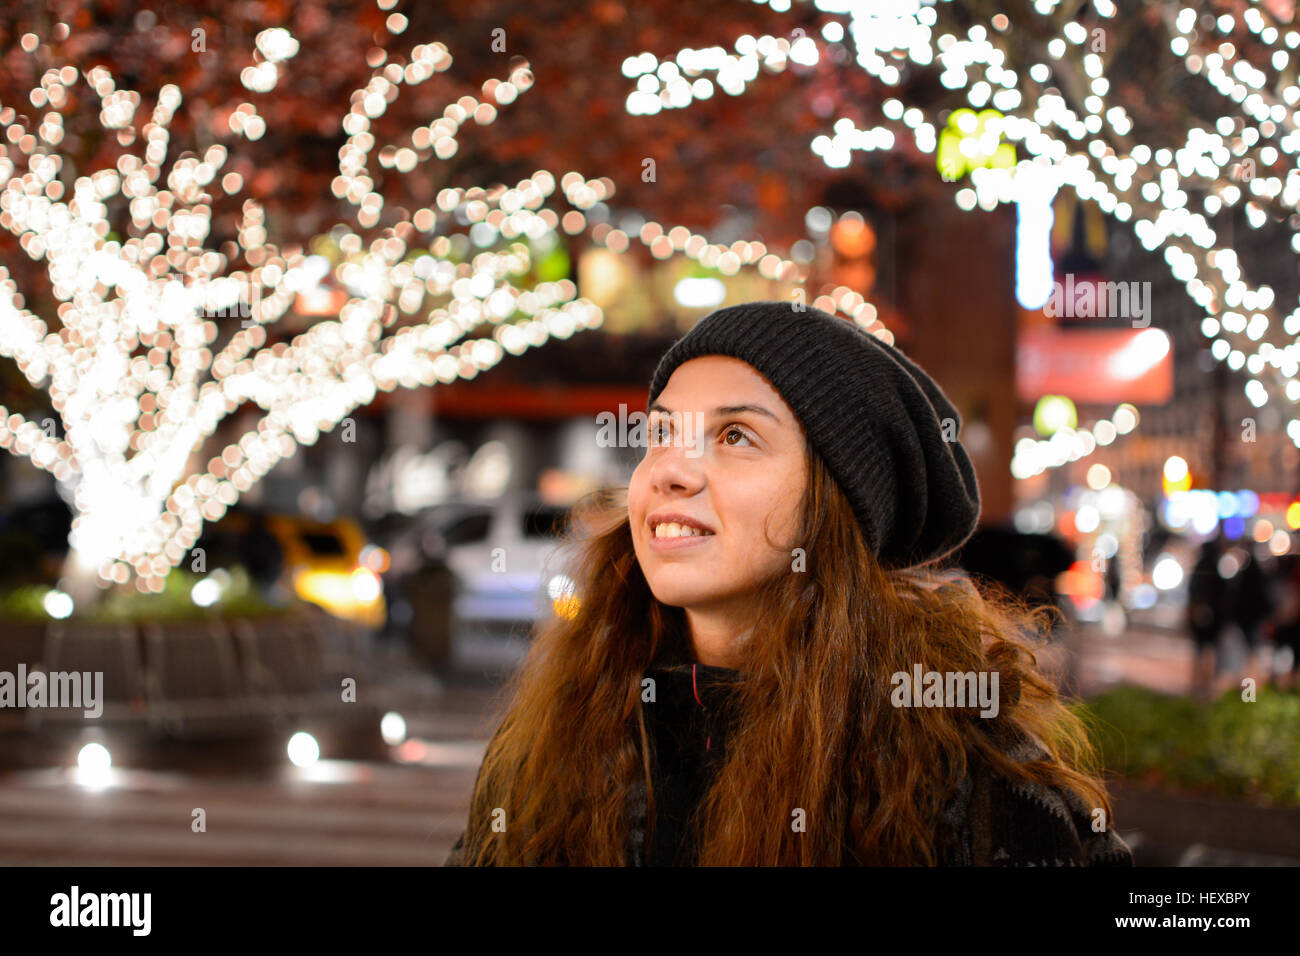 Pretty girl and with festive lights on trees in background Stock Photo